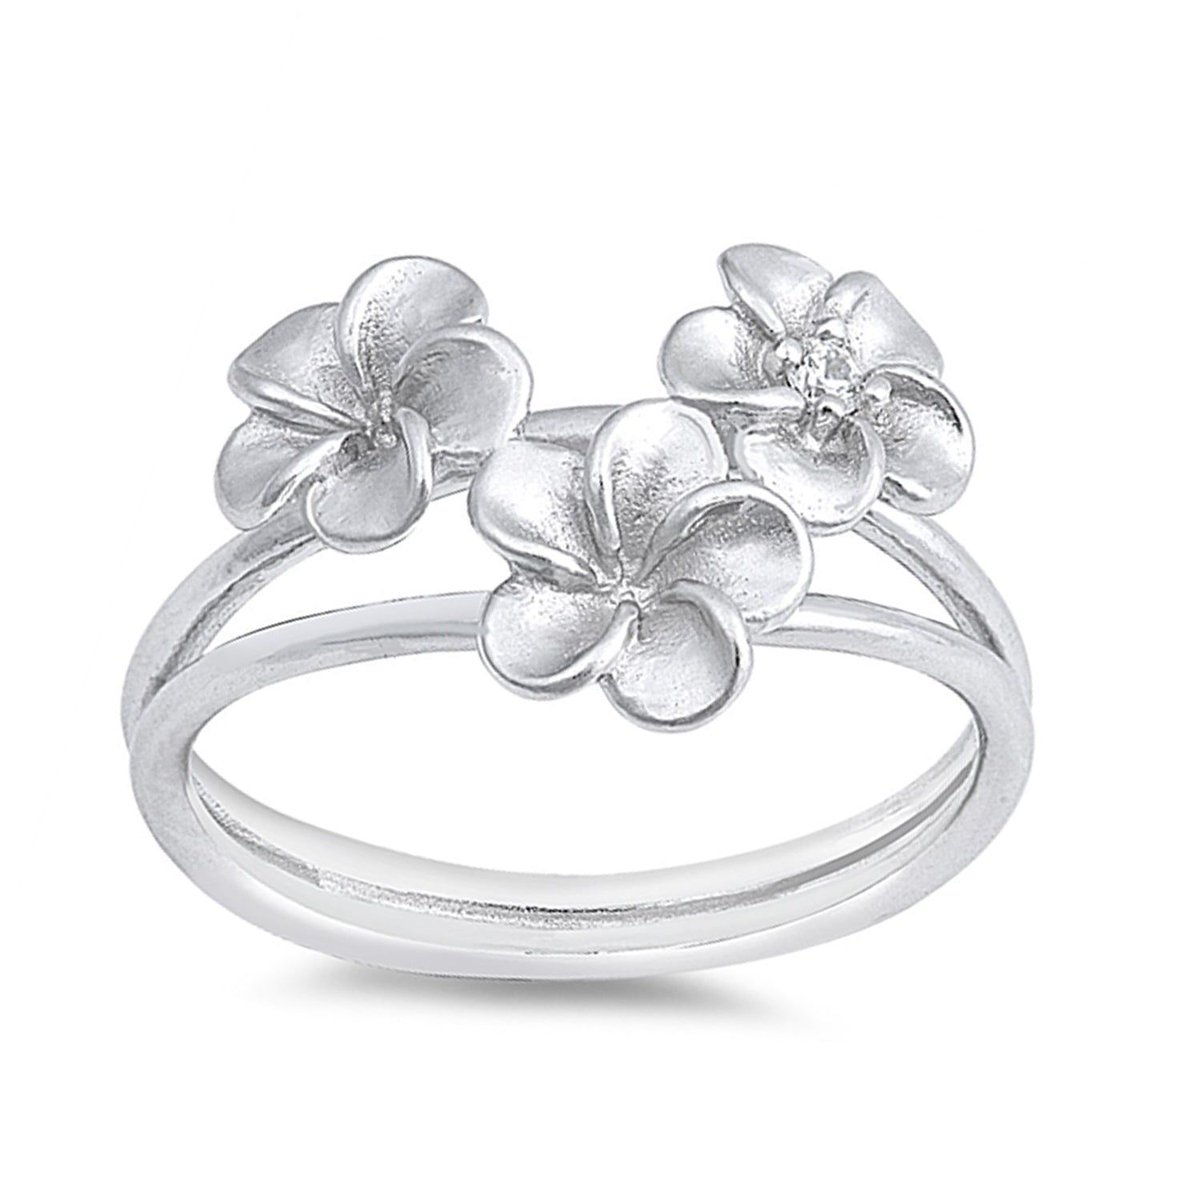 Plumerias are featured in this sterling silver statement ring. buff.ly/4dDV91w 

#luxsalvejewelry #plumeriaring #summertheme #sterlingsilver #womensrings #flowerring